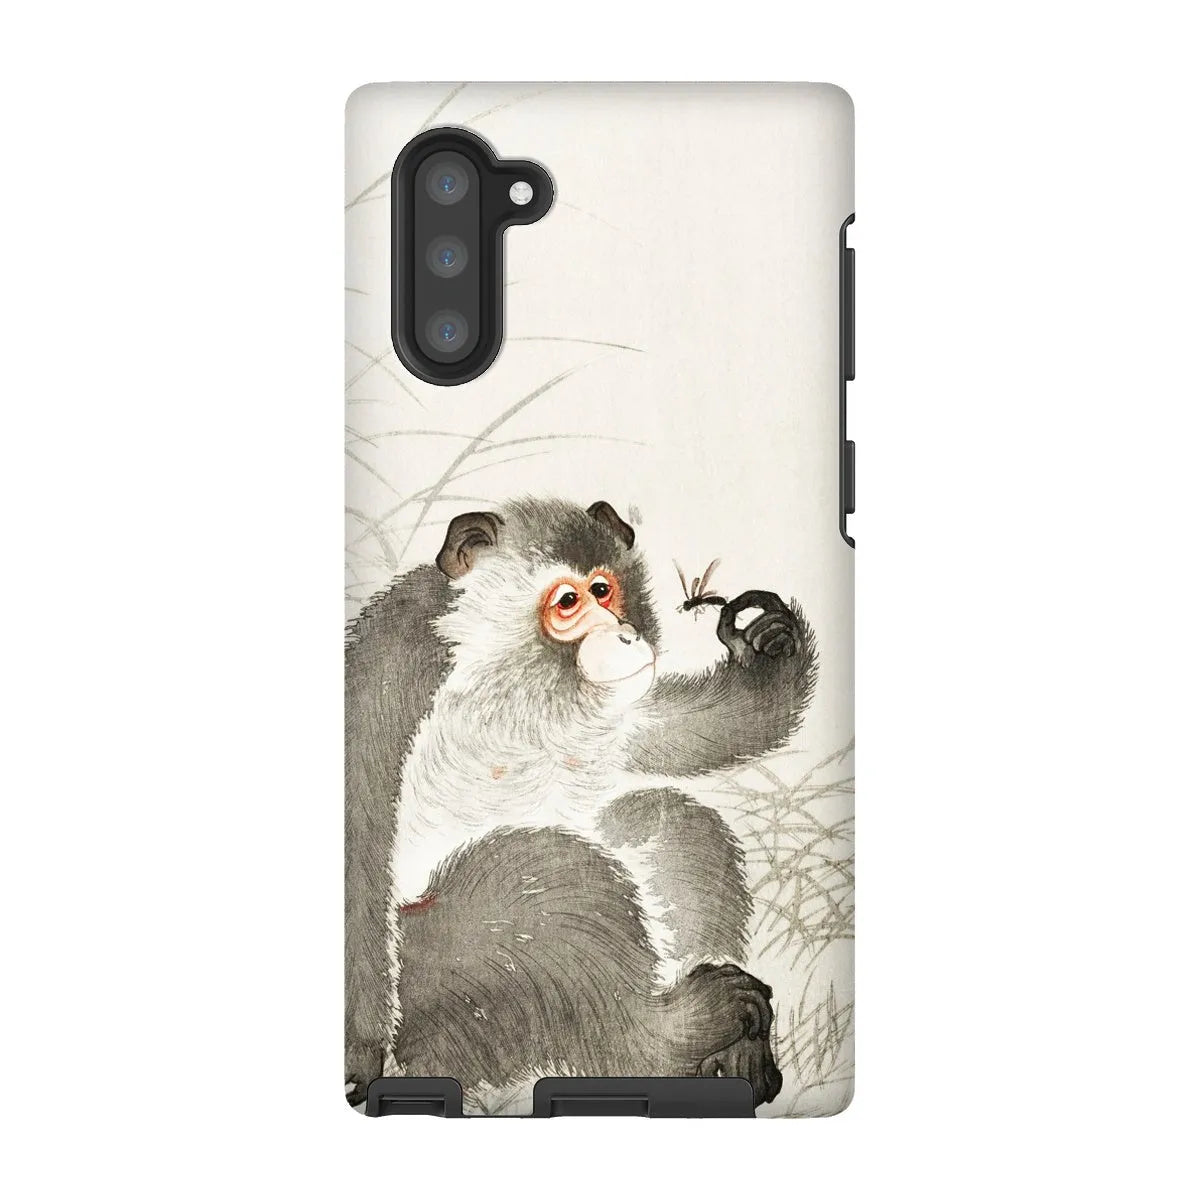 Monkey With Insect - Shin-hanga Art Phone Case - Ohara Koson - Samsung Galaxy Note 10 / Matte - Mobile Phone Cases